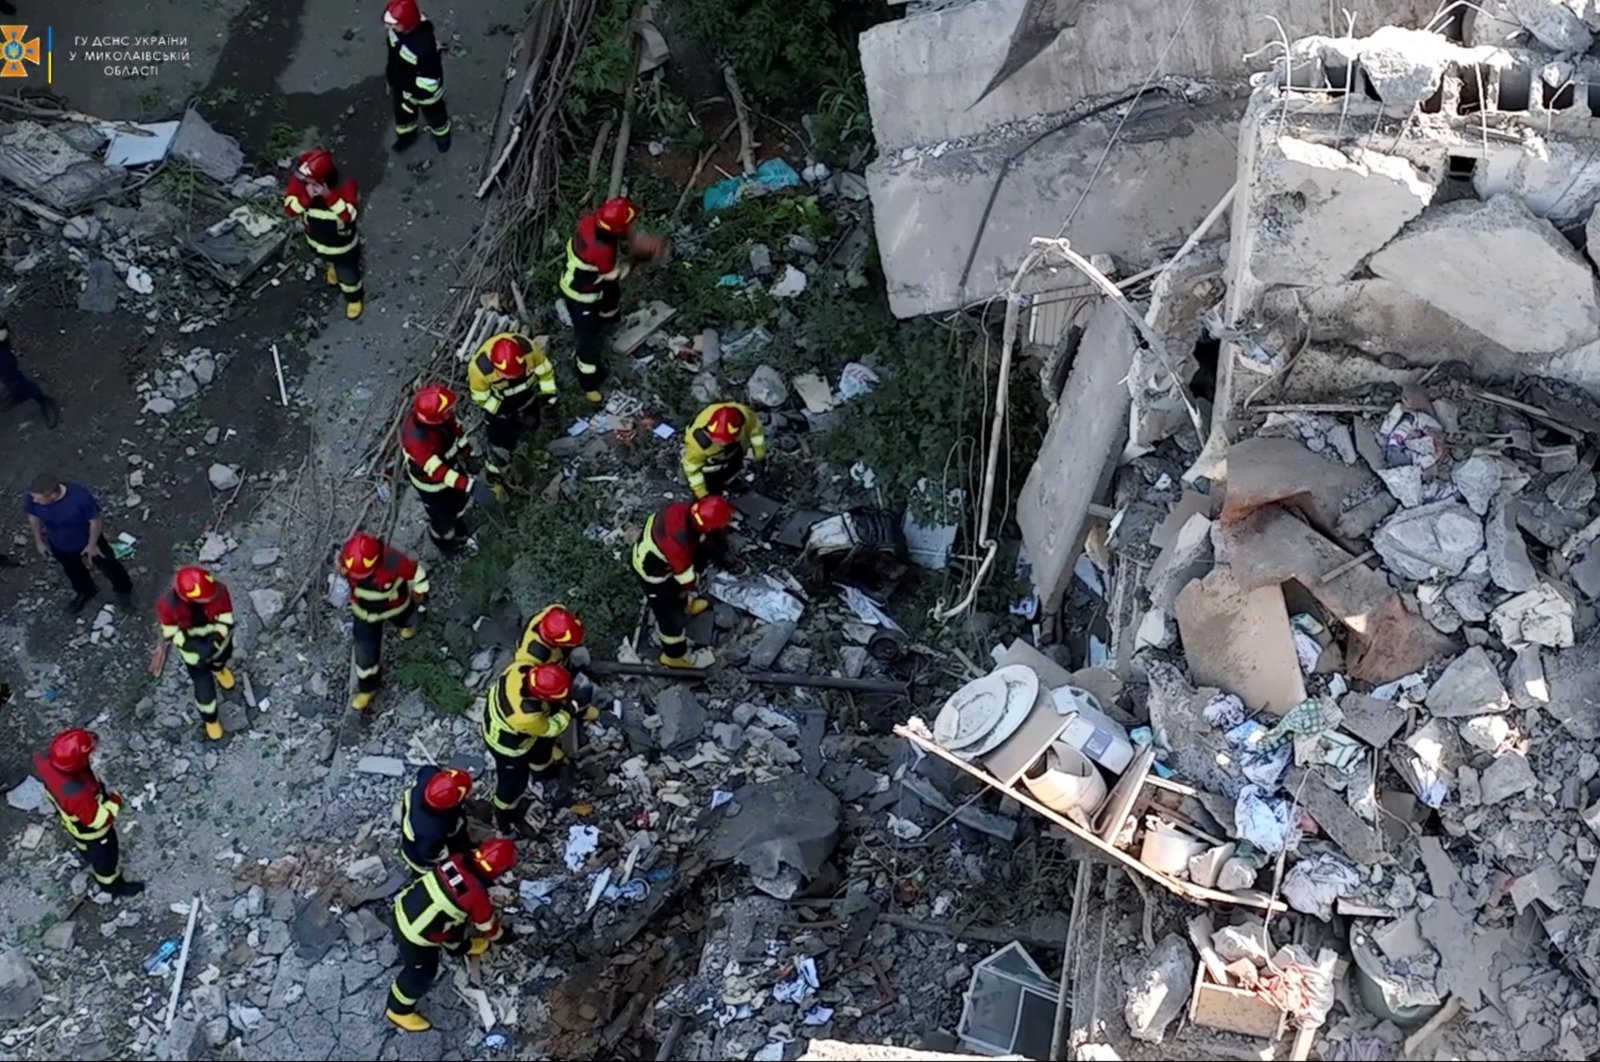 Rescuers work at a residential building hit by a Russian military strike in this screen grab obtained from a handout video, Mykolaiv, Ukraine, June 29, 2022. (State Emergency Service of Ukraine via Reuters)